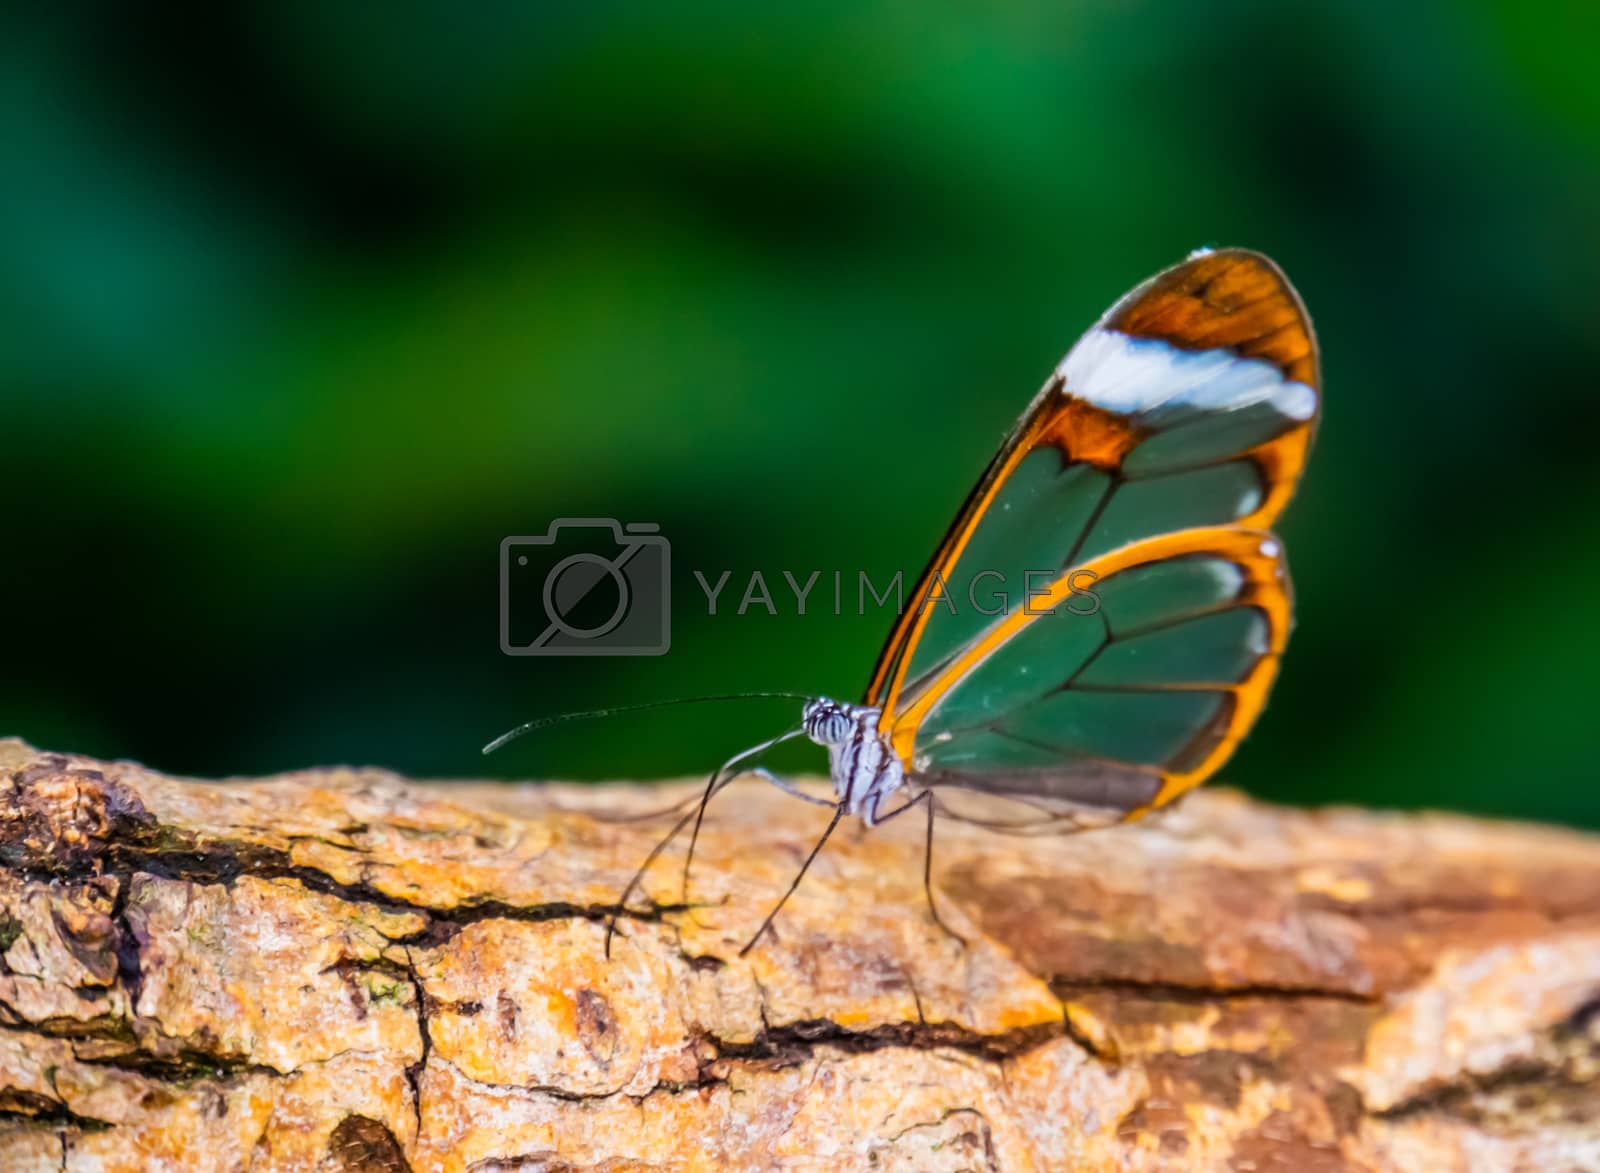 Royalty free image of beautiful closeup of a glasswing butterfly, tropical insect specie from south America by charlottebleijenberg